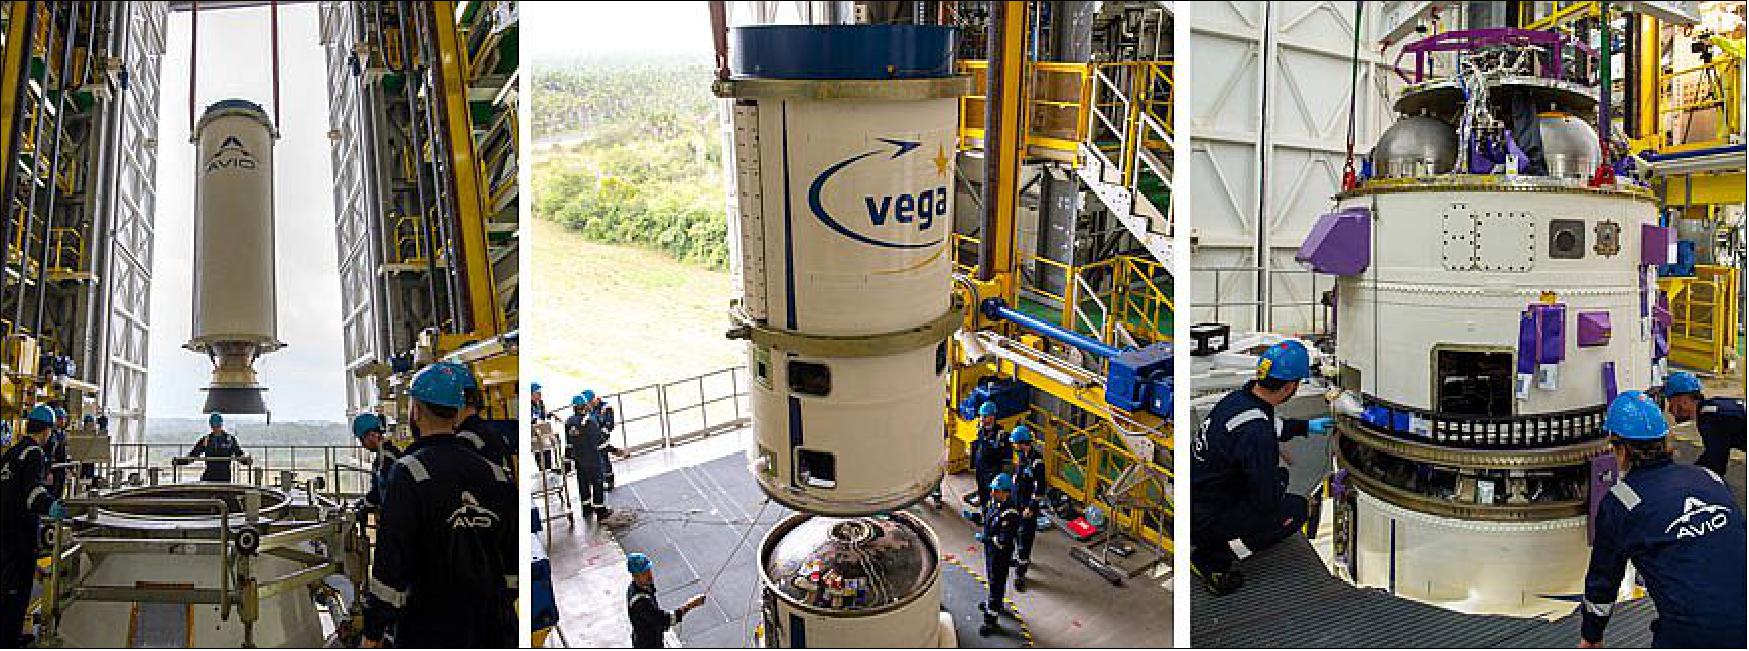 Figure 17: The Vega launcher for Arianespace Flight VV16 is shown taking shape during integration activity at the Spaceport in February. This photo sequence shows the solid propellant stages being "stacked" at the Vega Launch Complex (SLV), with the Zefiro 23 second stage's integration on the P80 first stage (at left), followed by installation of the Zefiro 9 third stage atop them (center). In the photo at right, Vega receives its liquid-propellant AVUM (Attitude and Vernier Upper Module), image credit: Arianespace